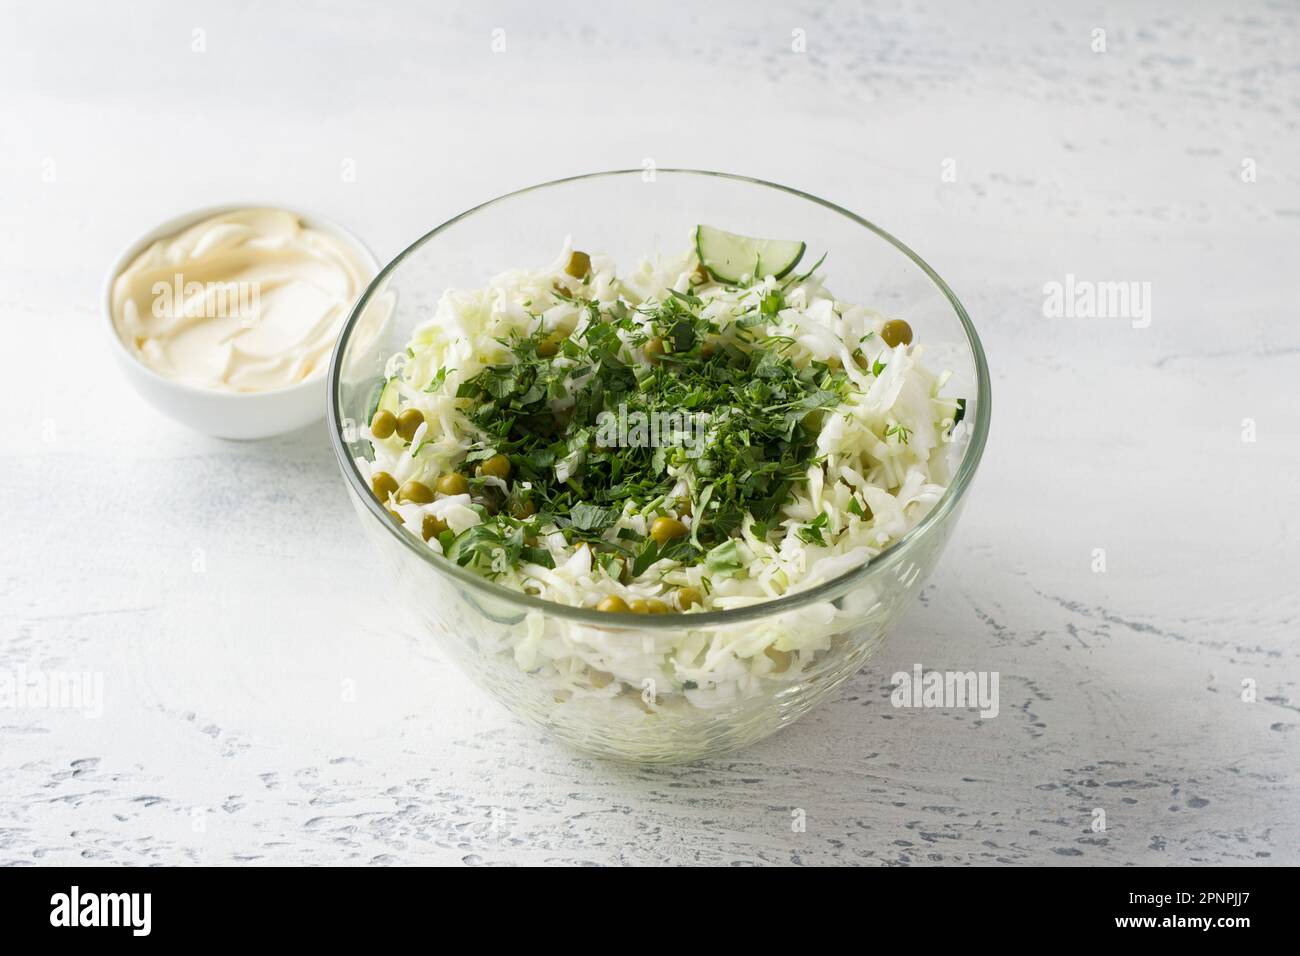 Glass bowl of cabbage salad with cucumbers, green peas, chopped herbs and mayonnaise dressing. Cooking delicious homemade salad. Step-by-step instruct Stock Photo